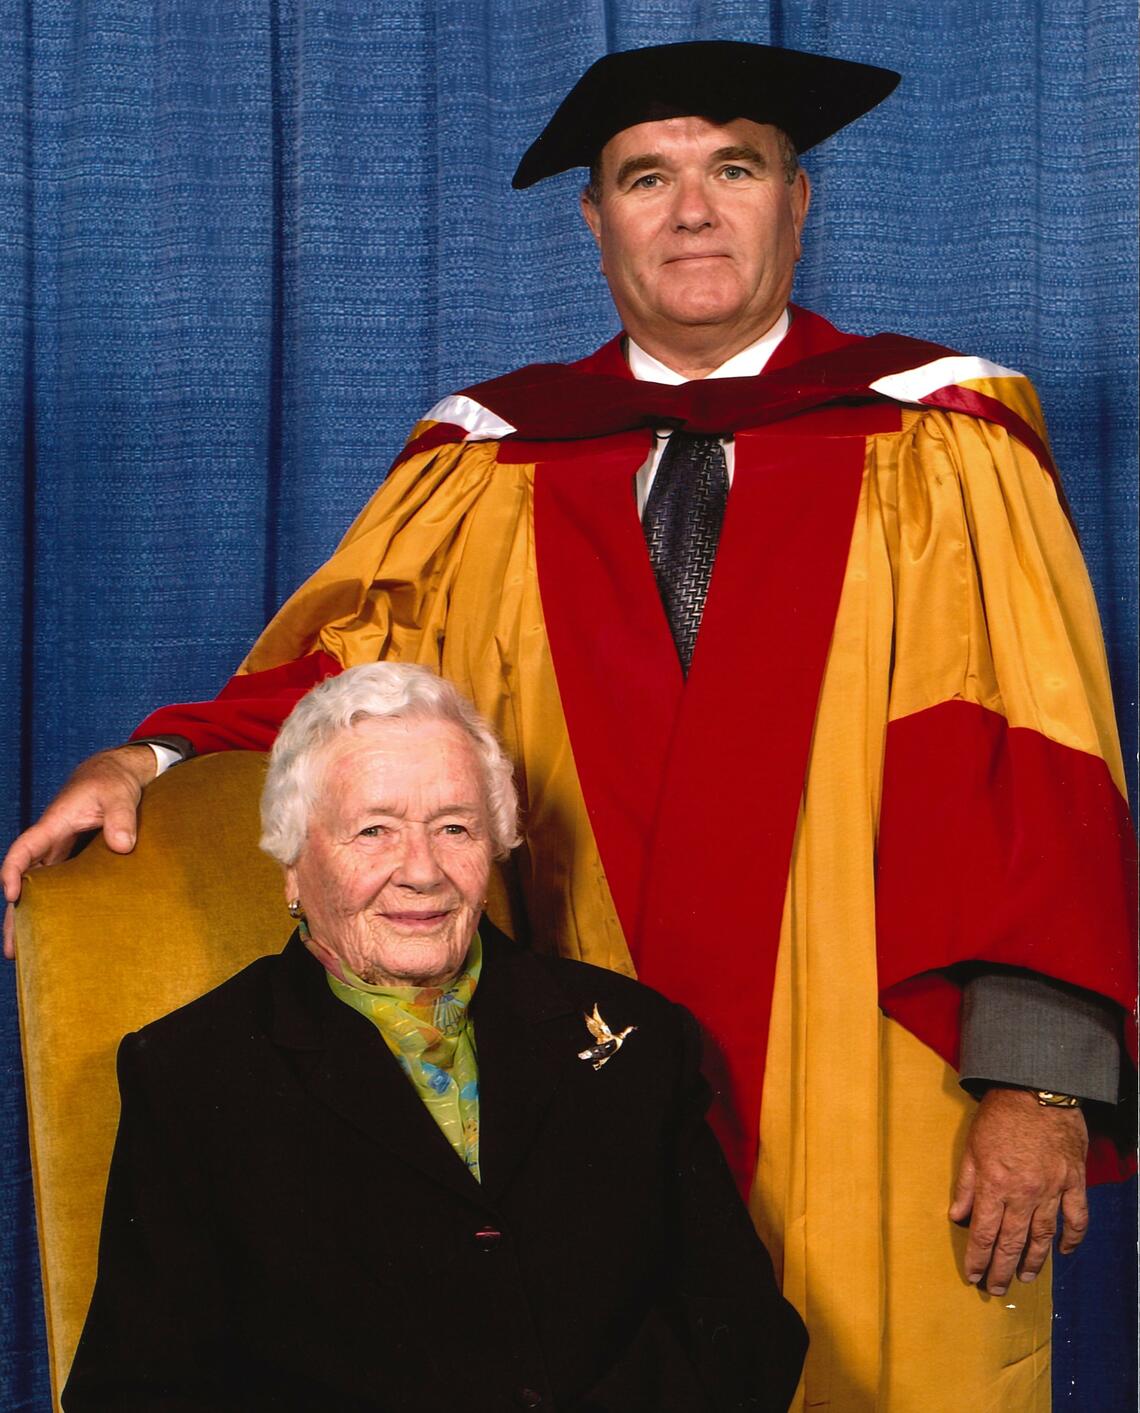 John Simpson, here with his mother Mary, received an honorary degree, Doctor of Laws, from the University of Calgary in 2005.